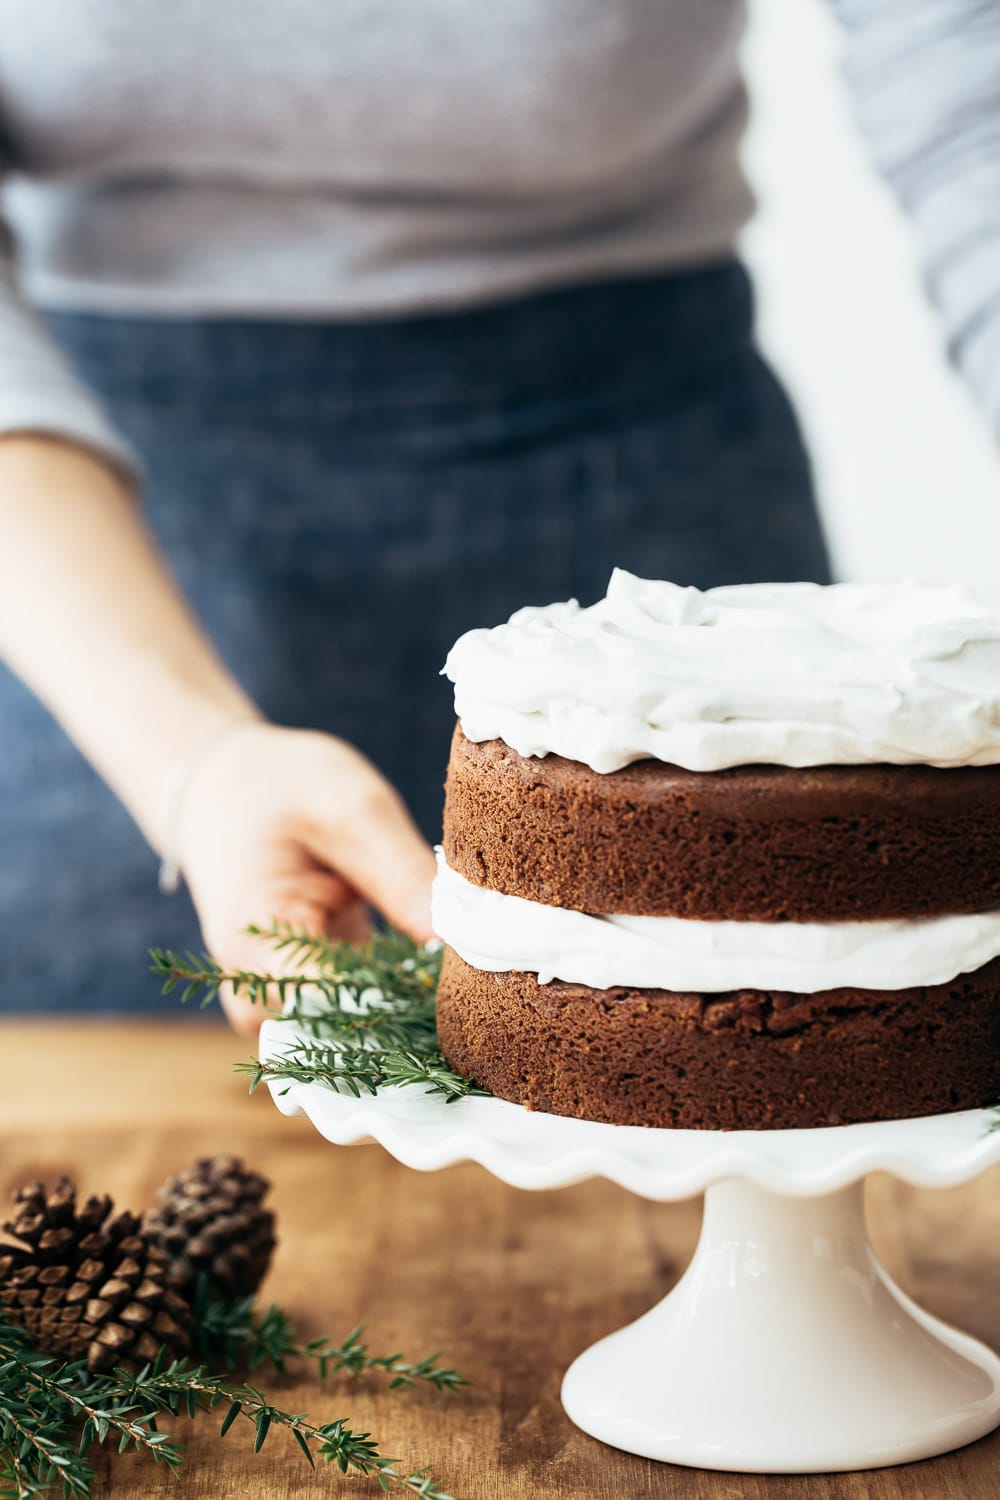 A woman is photographed from the front view as she is getting ready to garnish a Coconut Flour Gingerbread Cake with cranberry topping.